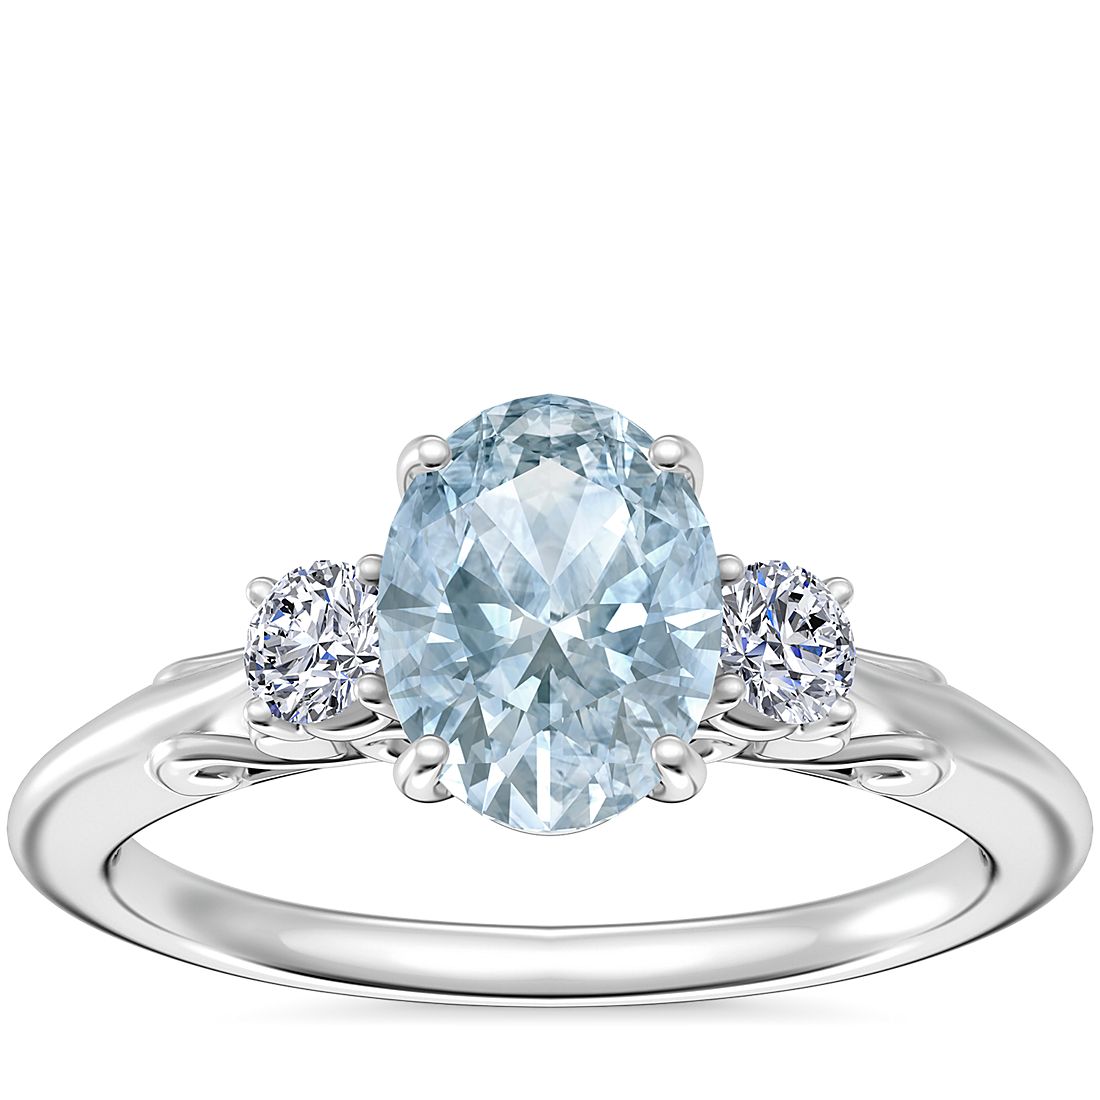 Vintage Three Stone Engagement Ring with Oval Aquamarine in 14k White Gold (8x6mm)